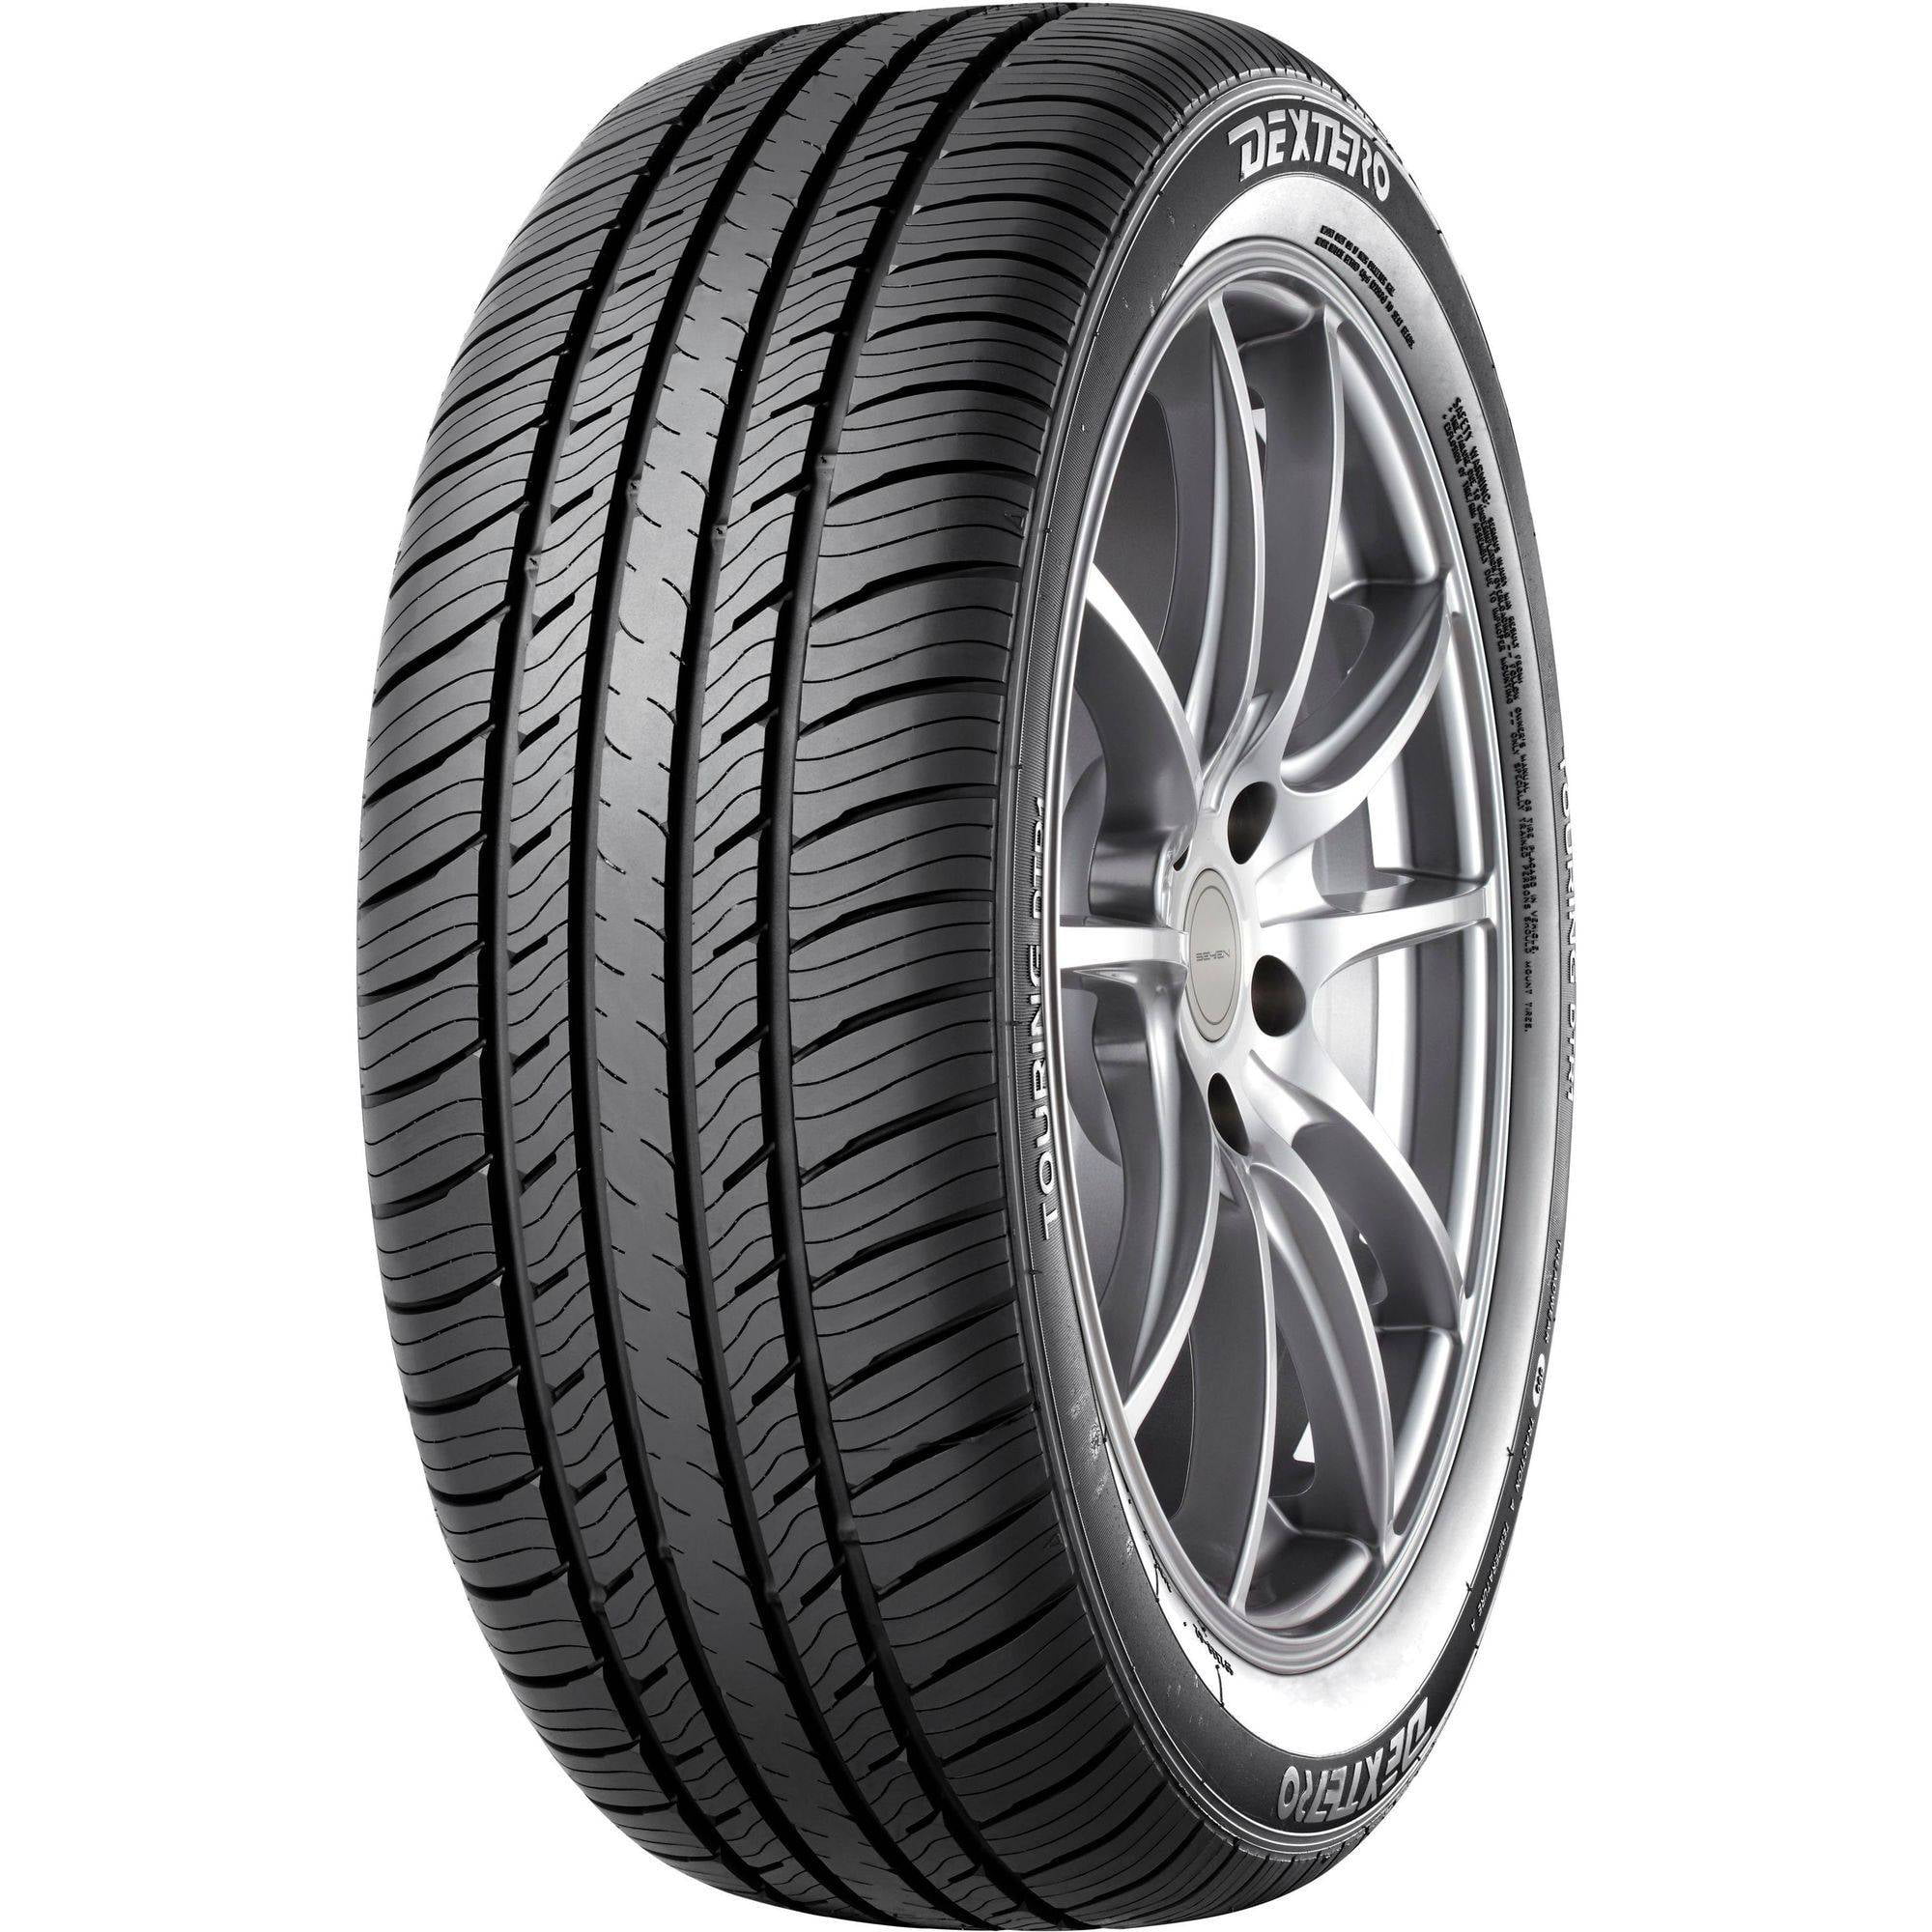 1x New 205/60R16 Lanvigator Budget Tyre One 205 60 r 16 Fitting Available Tyres 